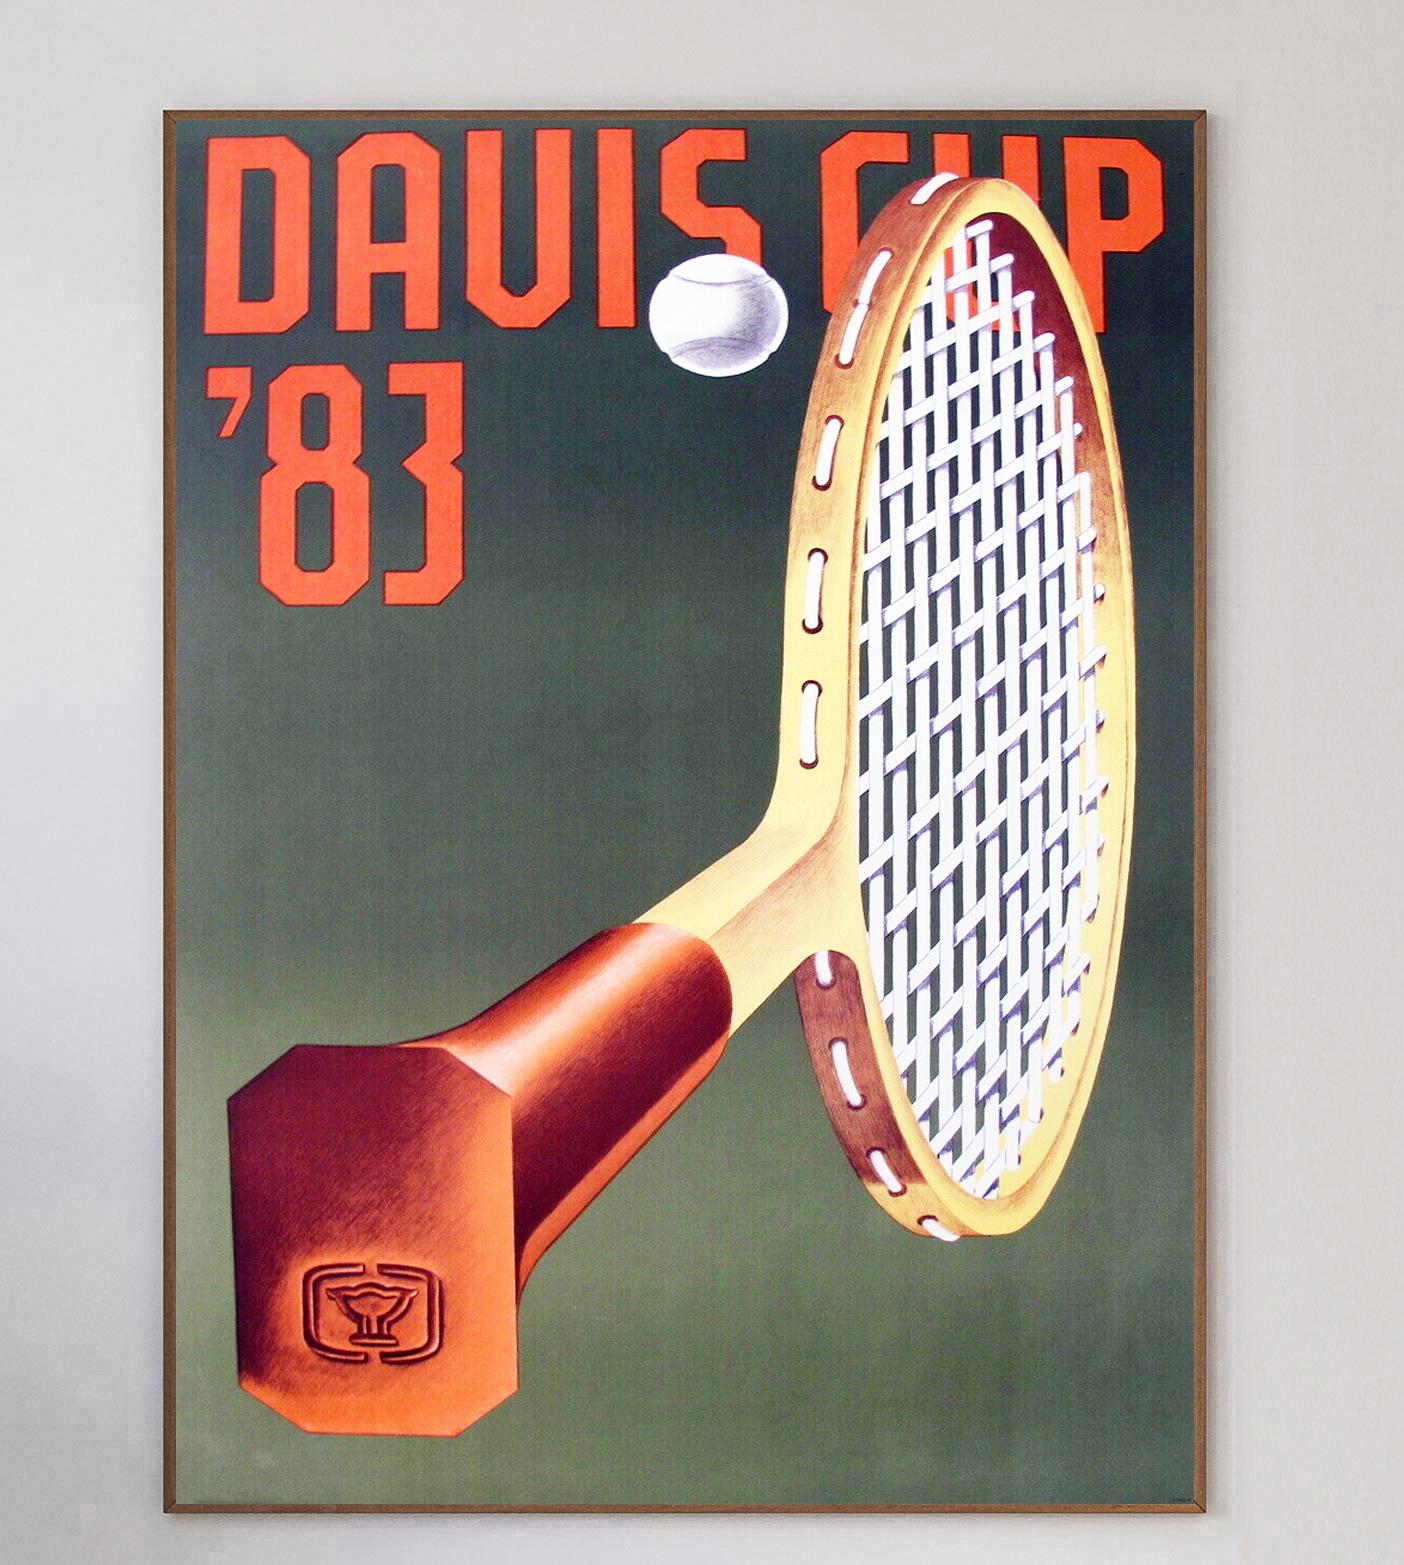 Beginning in 1900, the Davis Cup, regarded as the 